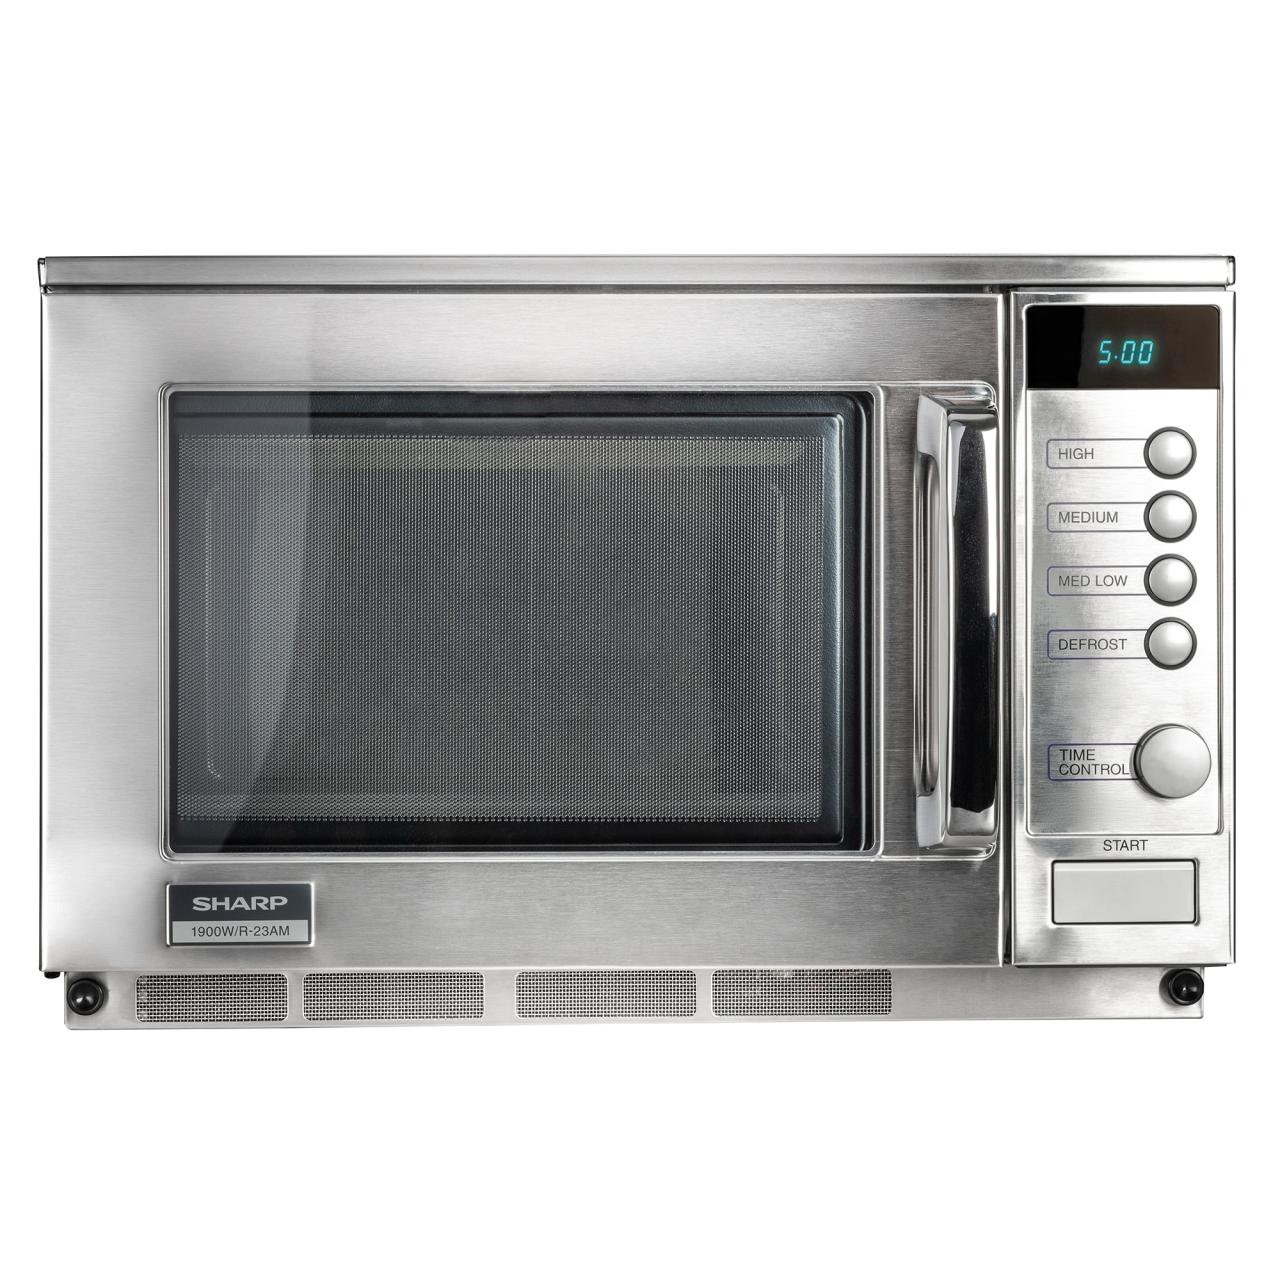 Sharp R23AM Extra Heavy Duty 1900W Commercial Microwave